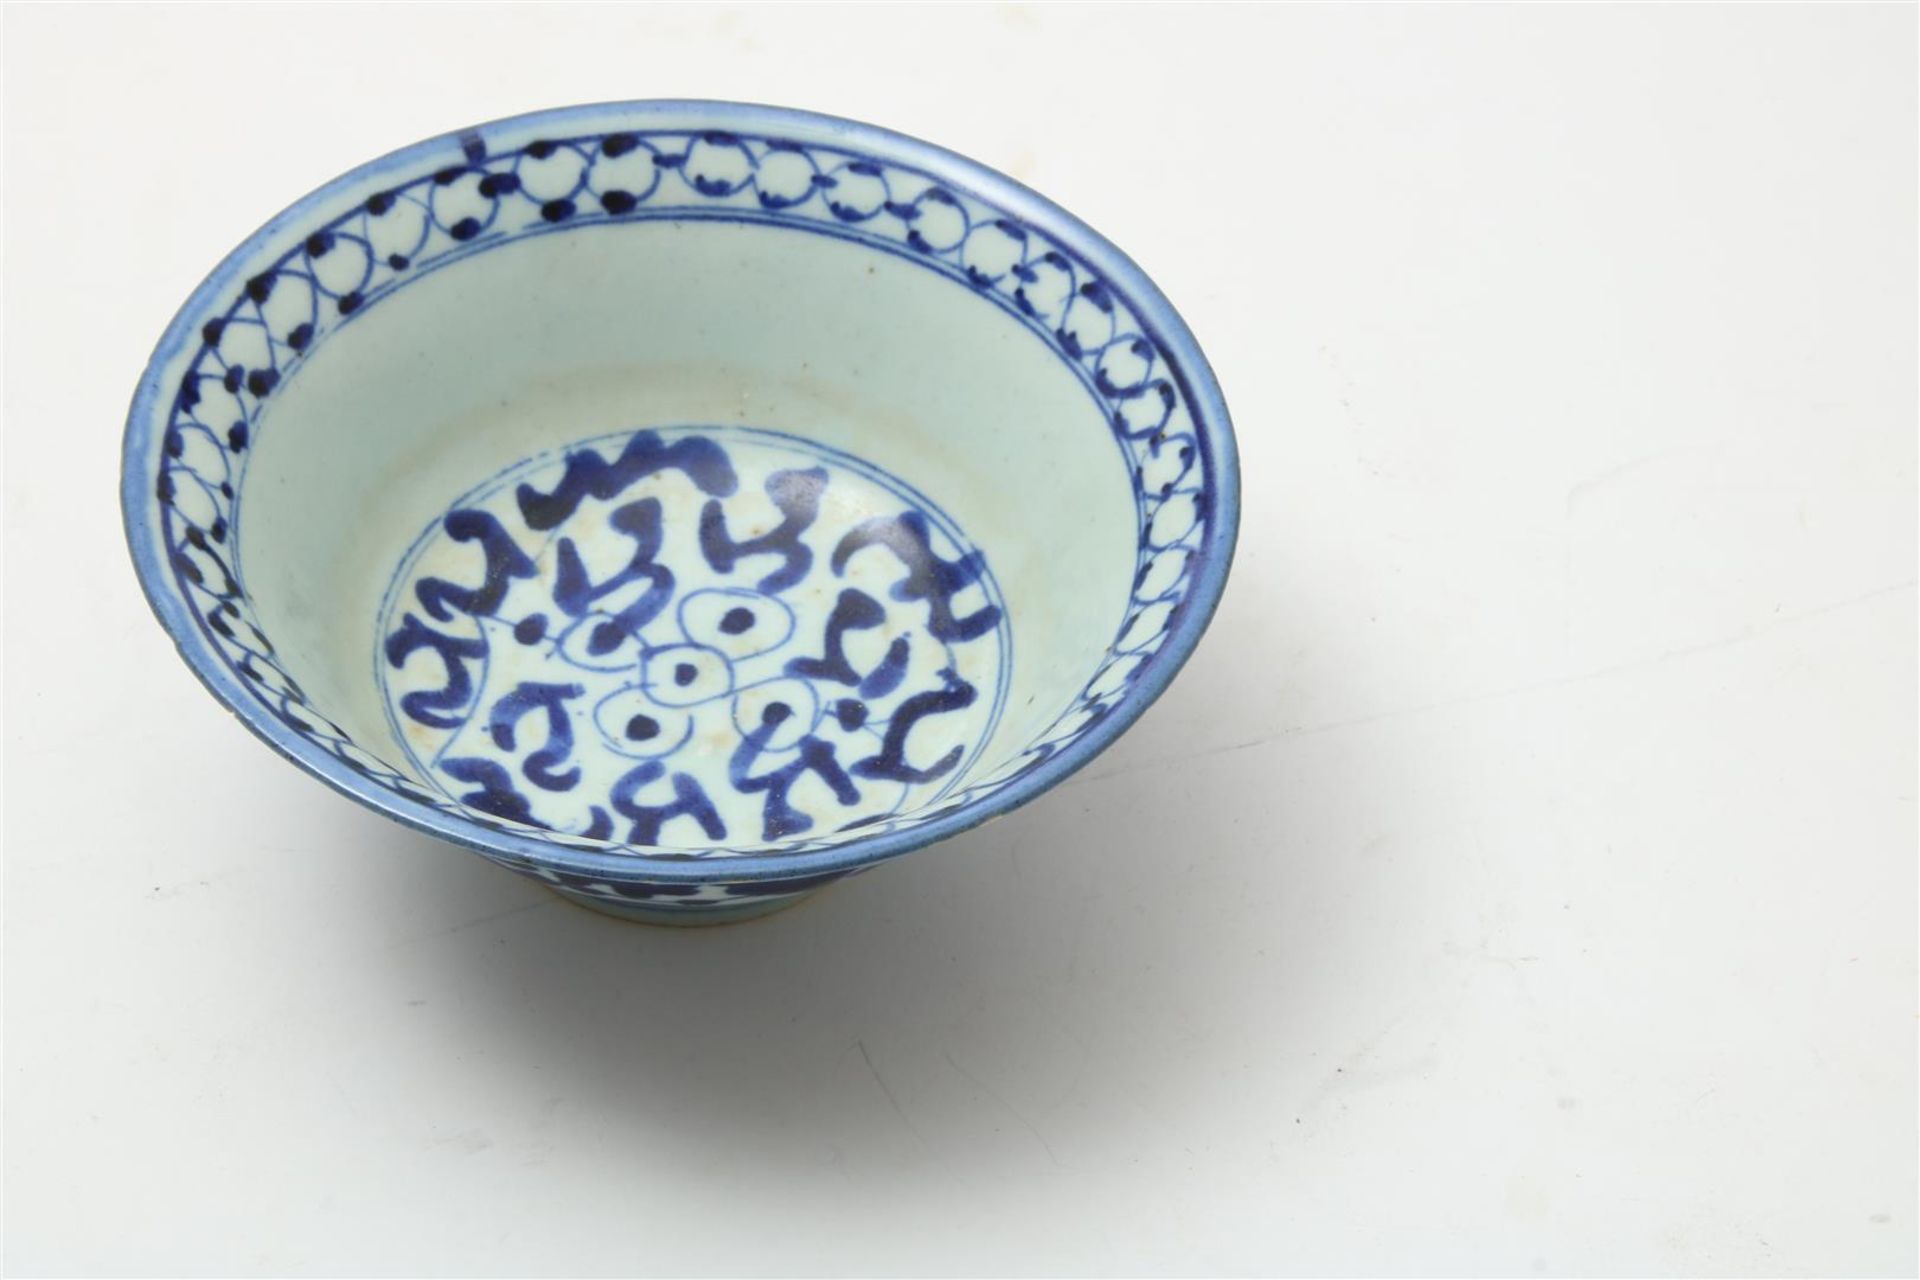 Porcelain bowl blue decorated with flowers, China 18th/19th century, marked with shopkeeper's - Image 3 of 5